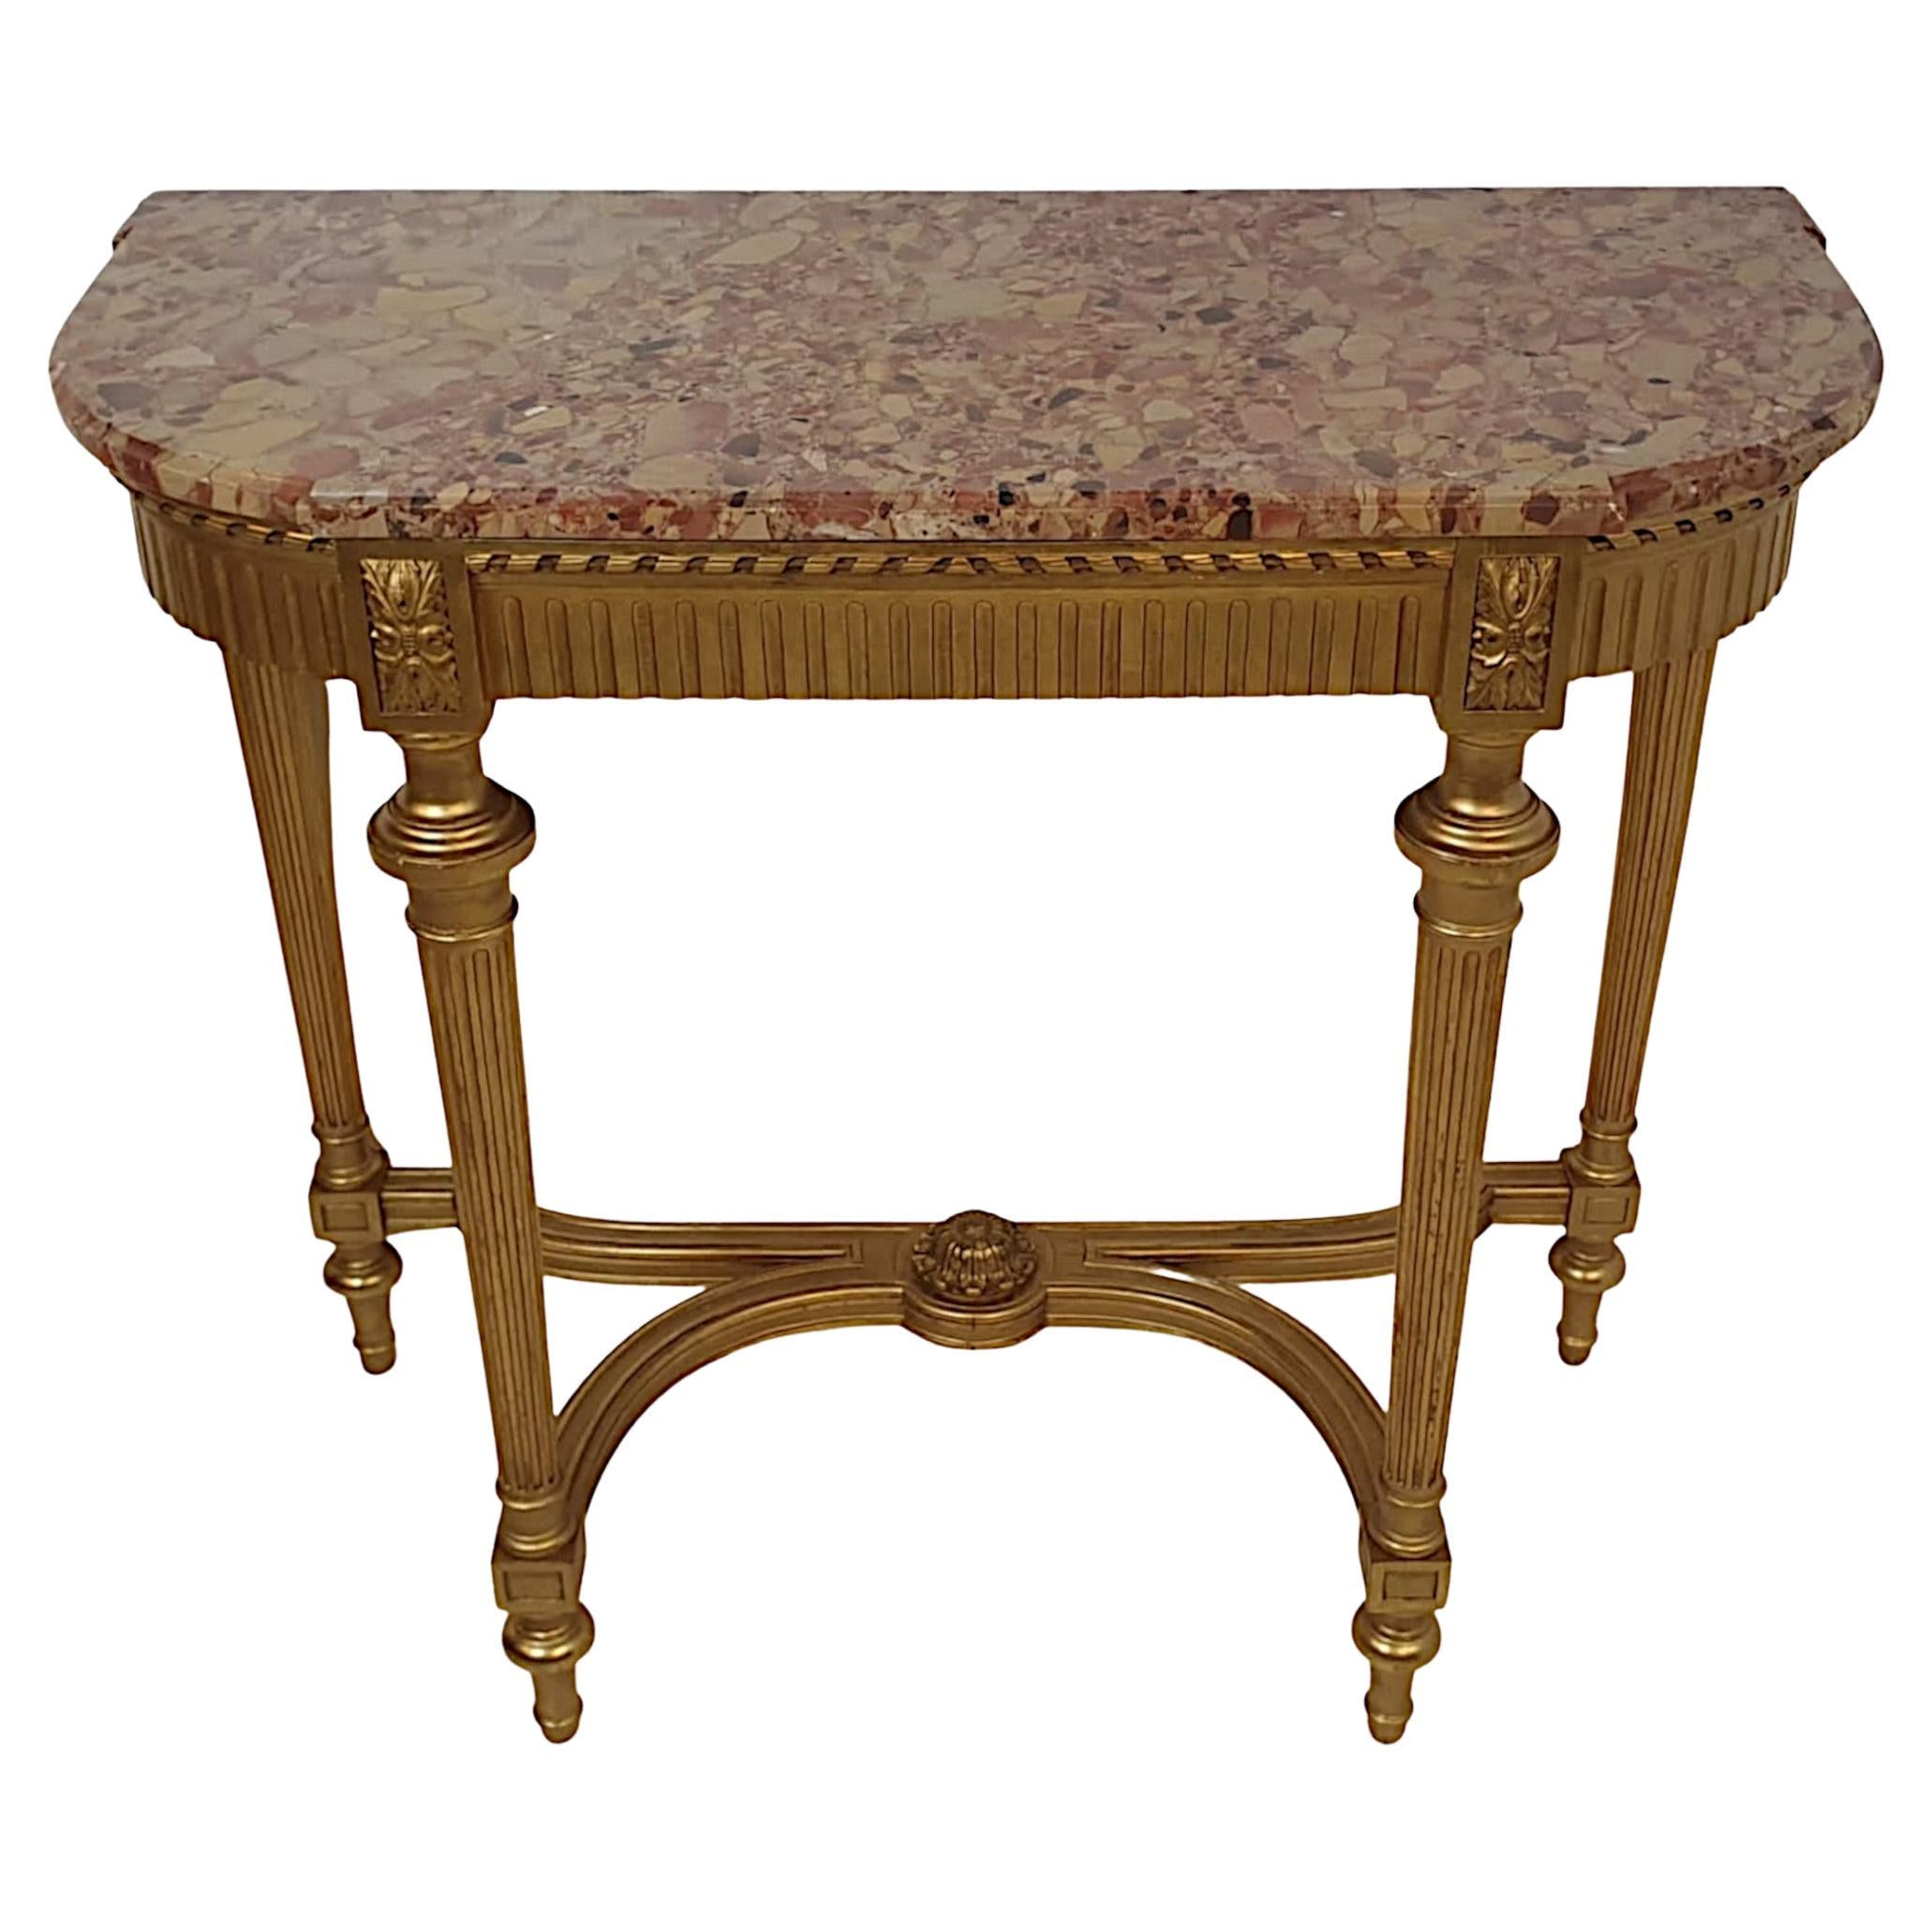 Striking 19th Century Gilt Marble Topped Console Table